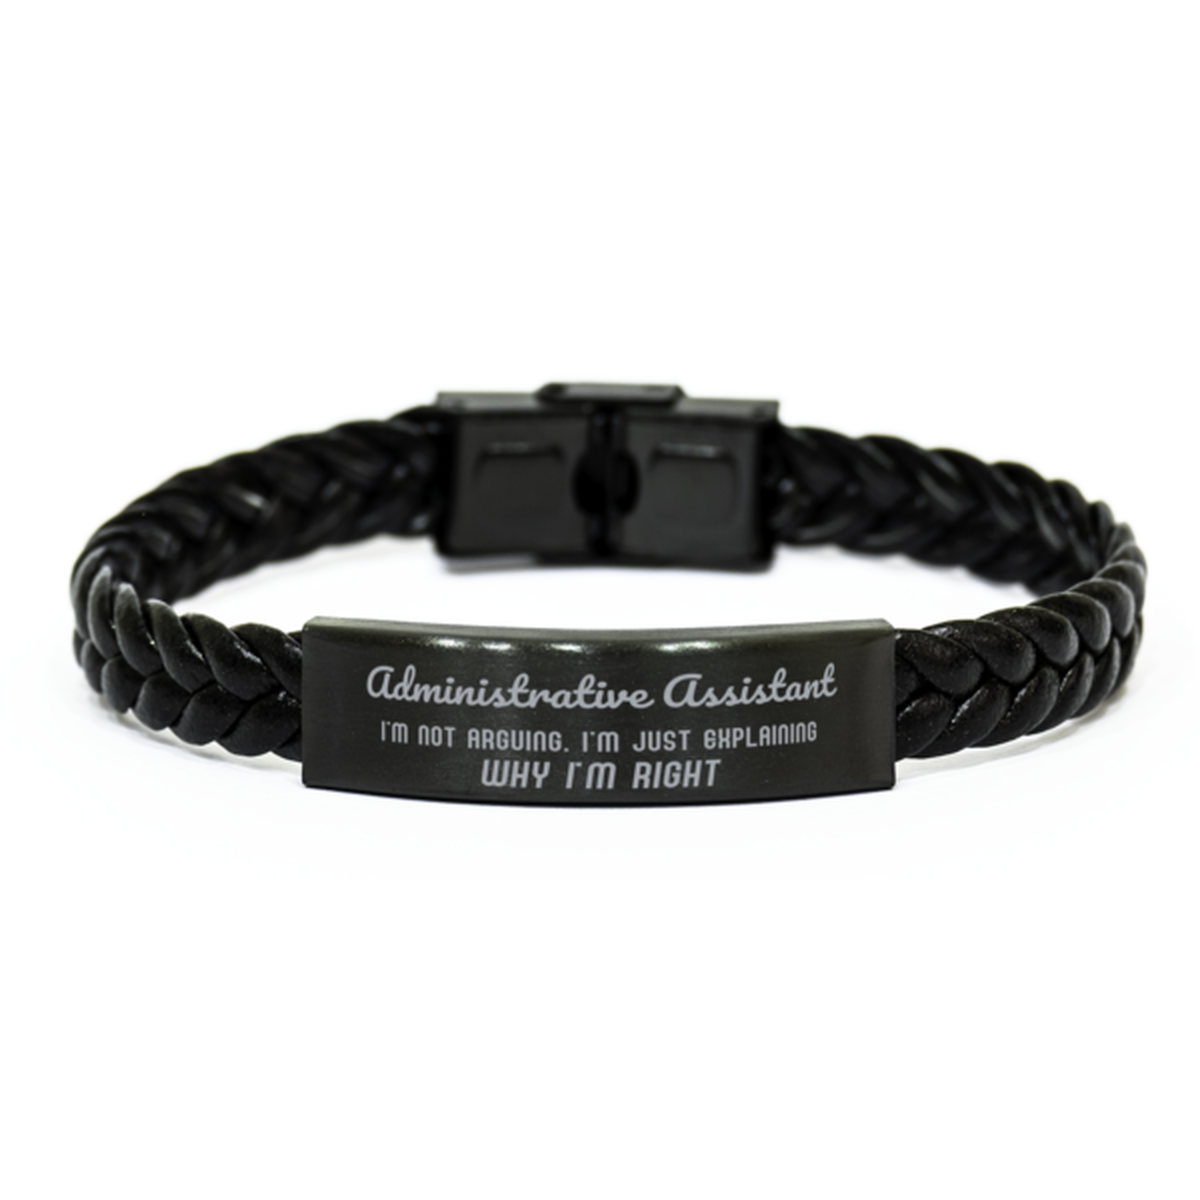 Administrative Assistant I'm not Arguing. I'm Just Explaining Why I'm RIGHT Braided Leather Bracelet, Graduation Birthday Christmas Administrative Assistant Gifts For Administrative Assistant Funny Saying Quote Present for Men Women Coworker